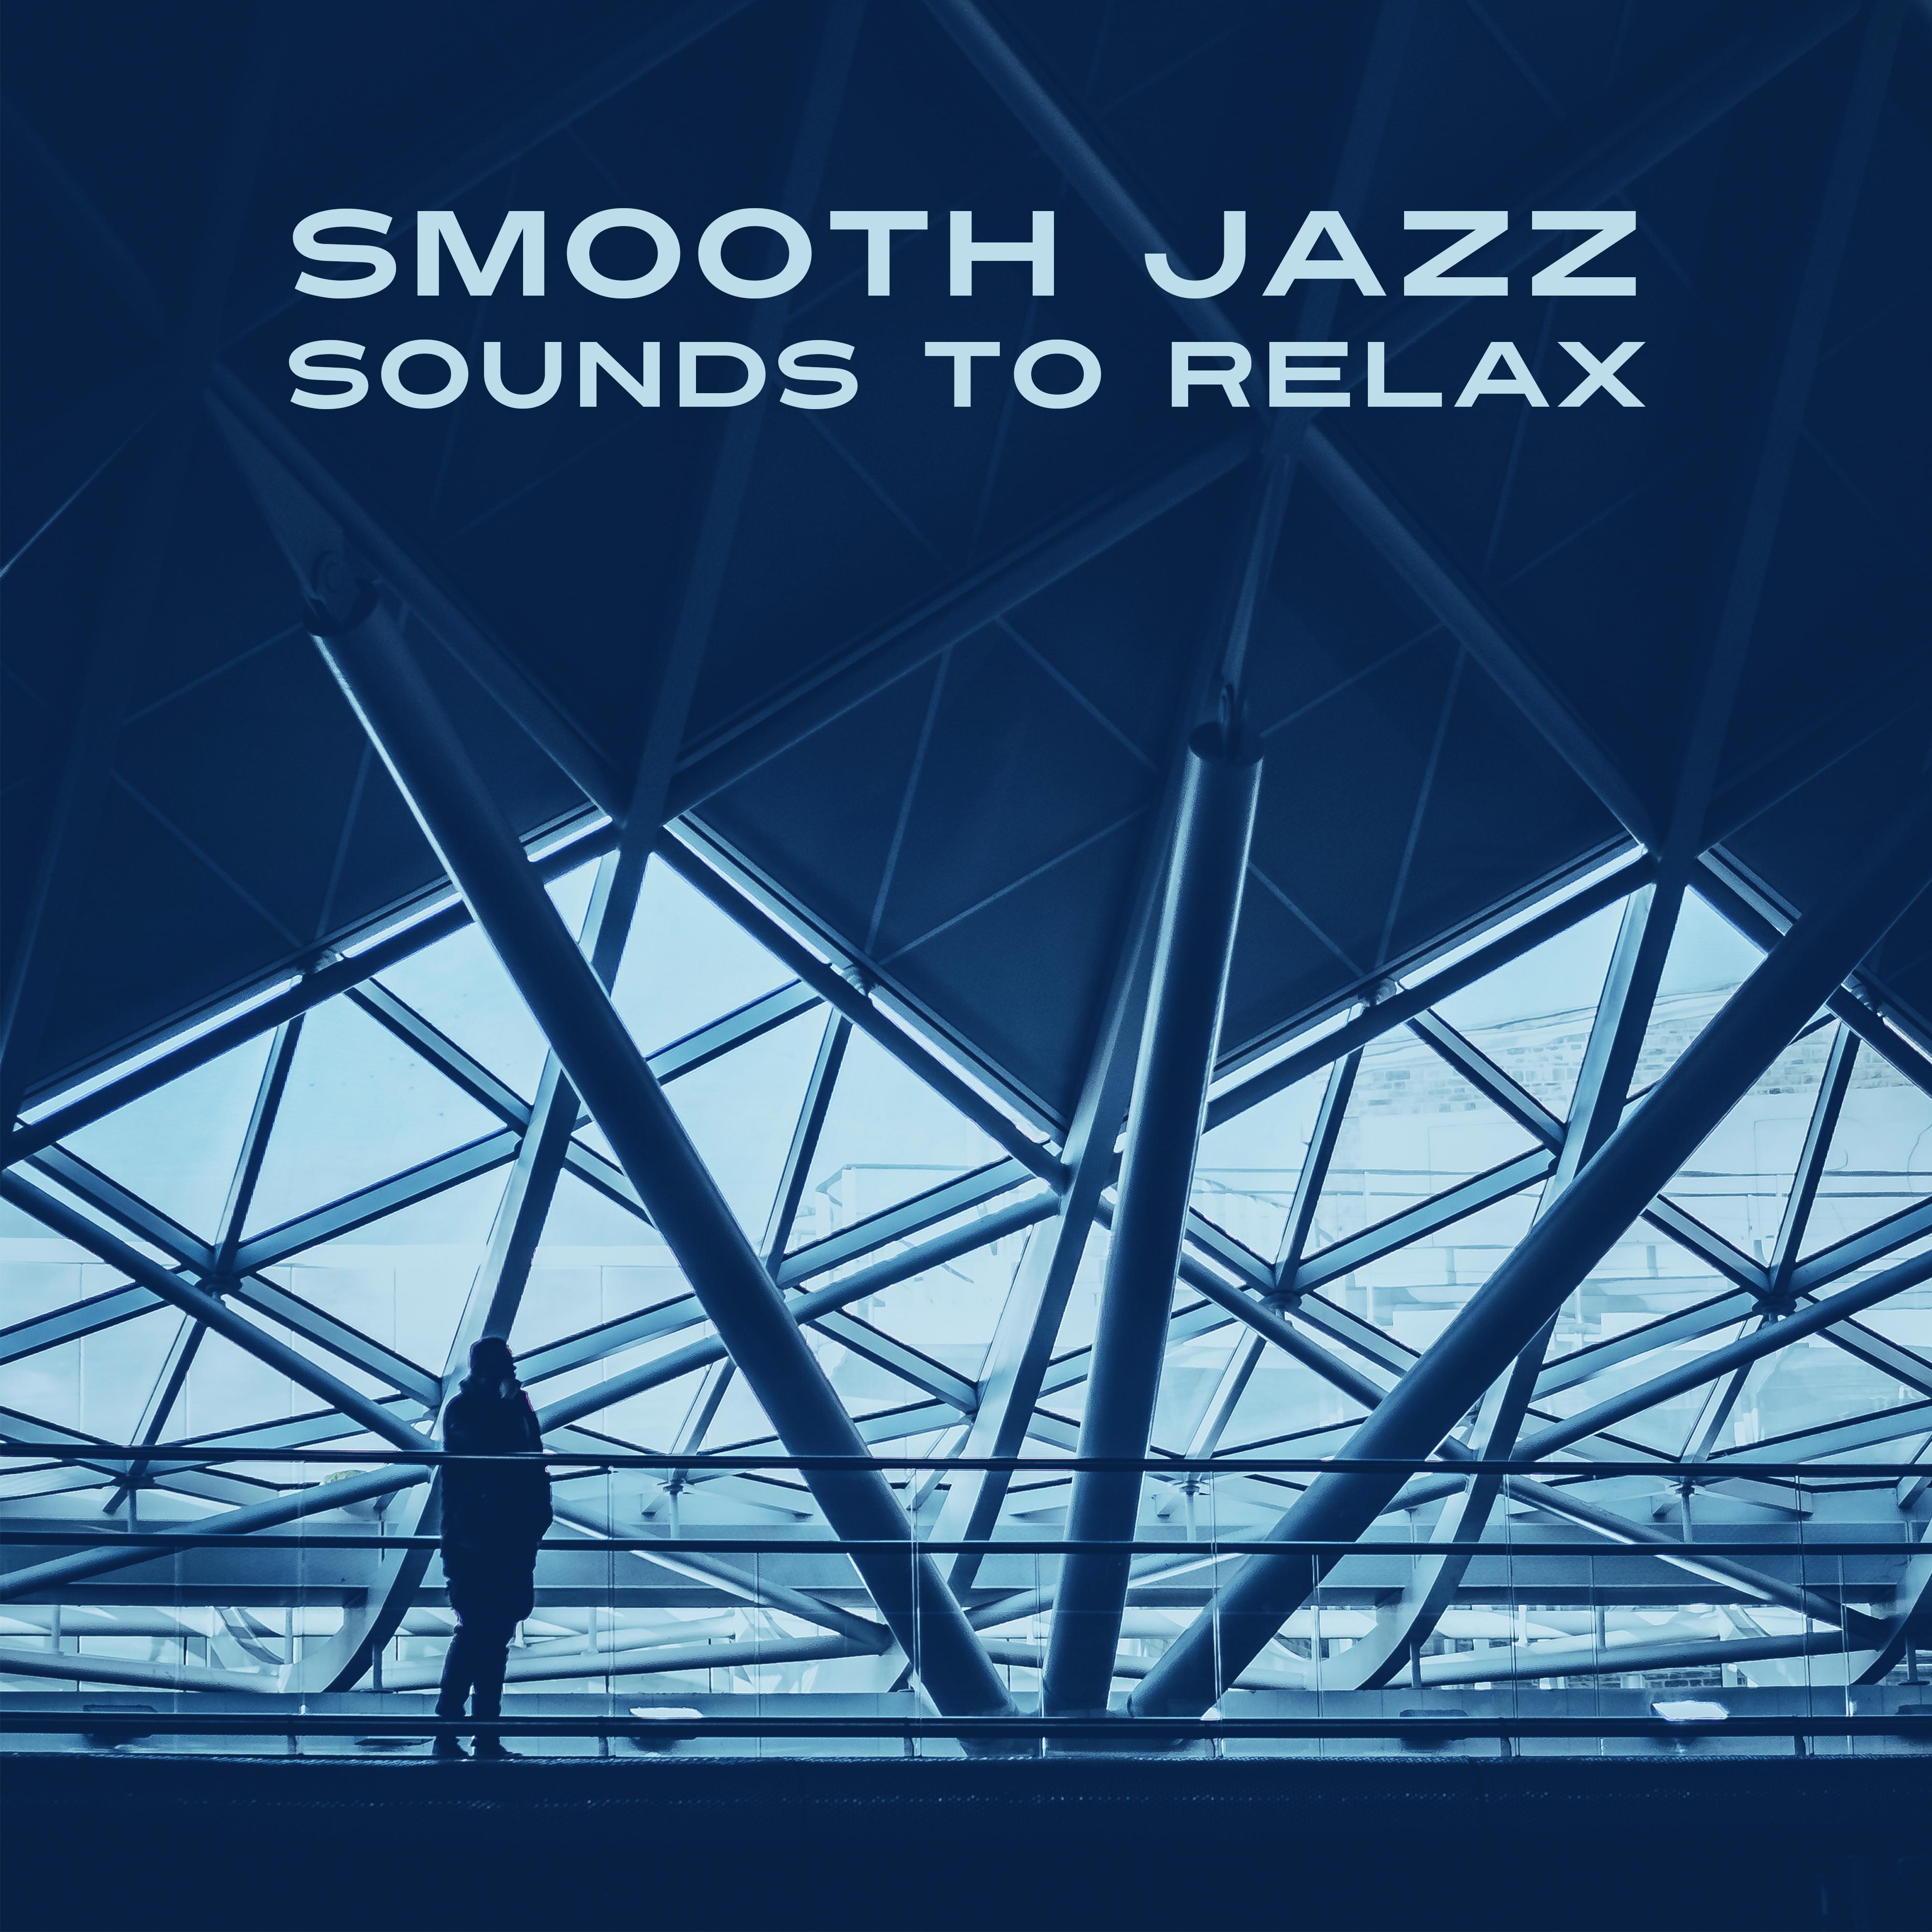 Smooth Jazz Sounds to Relax – Relaxing Jazz Music, Rest with Piano, Moonlight Note, Calm Down